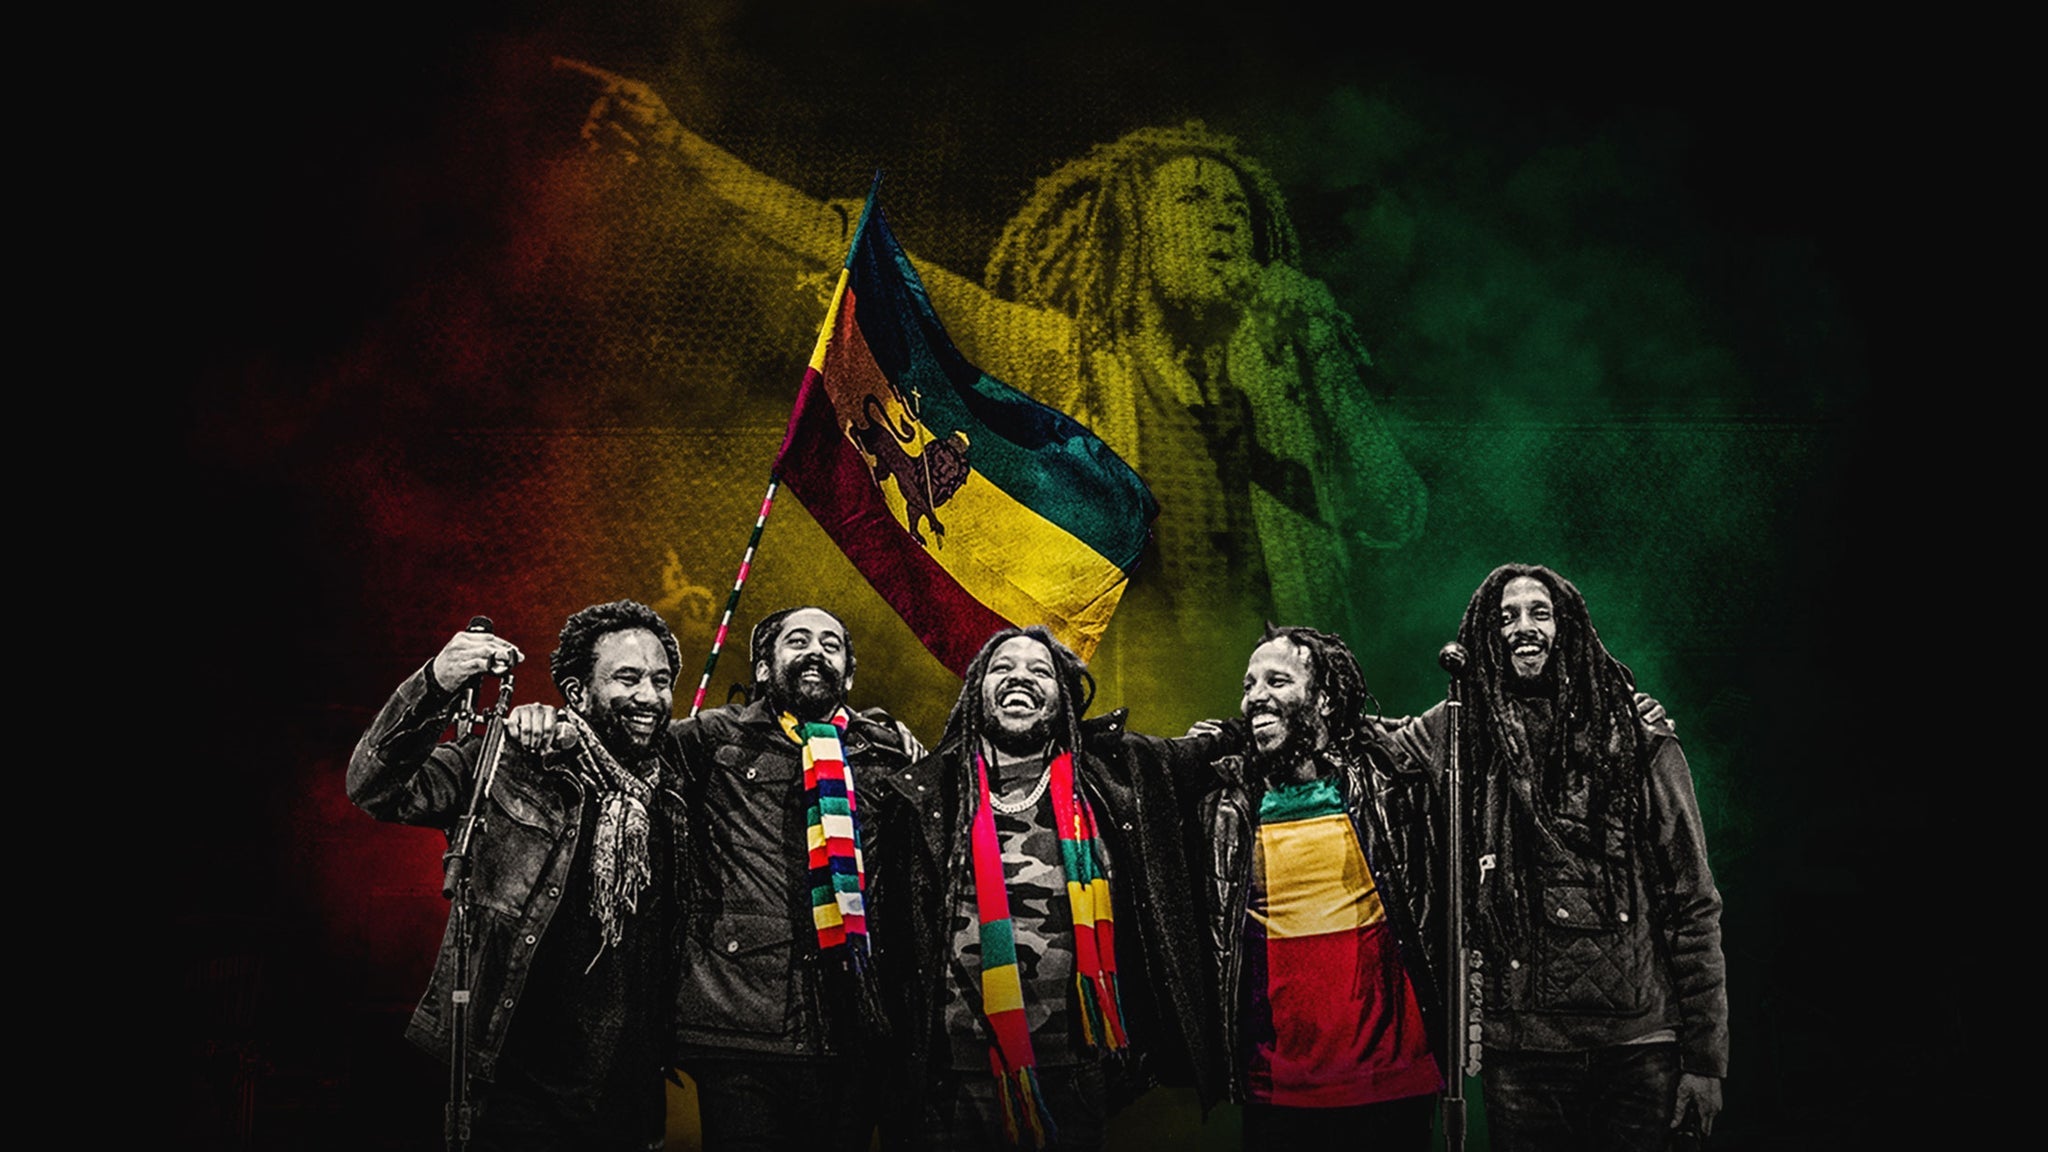 The Marley Brothers: The Legacy Tour